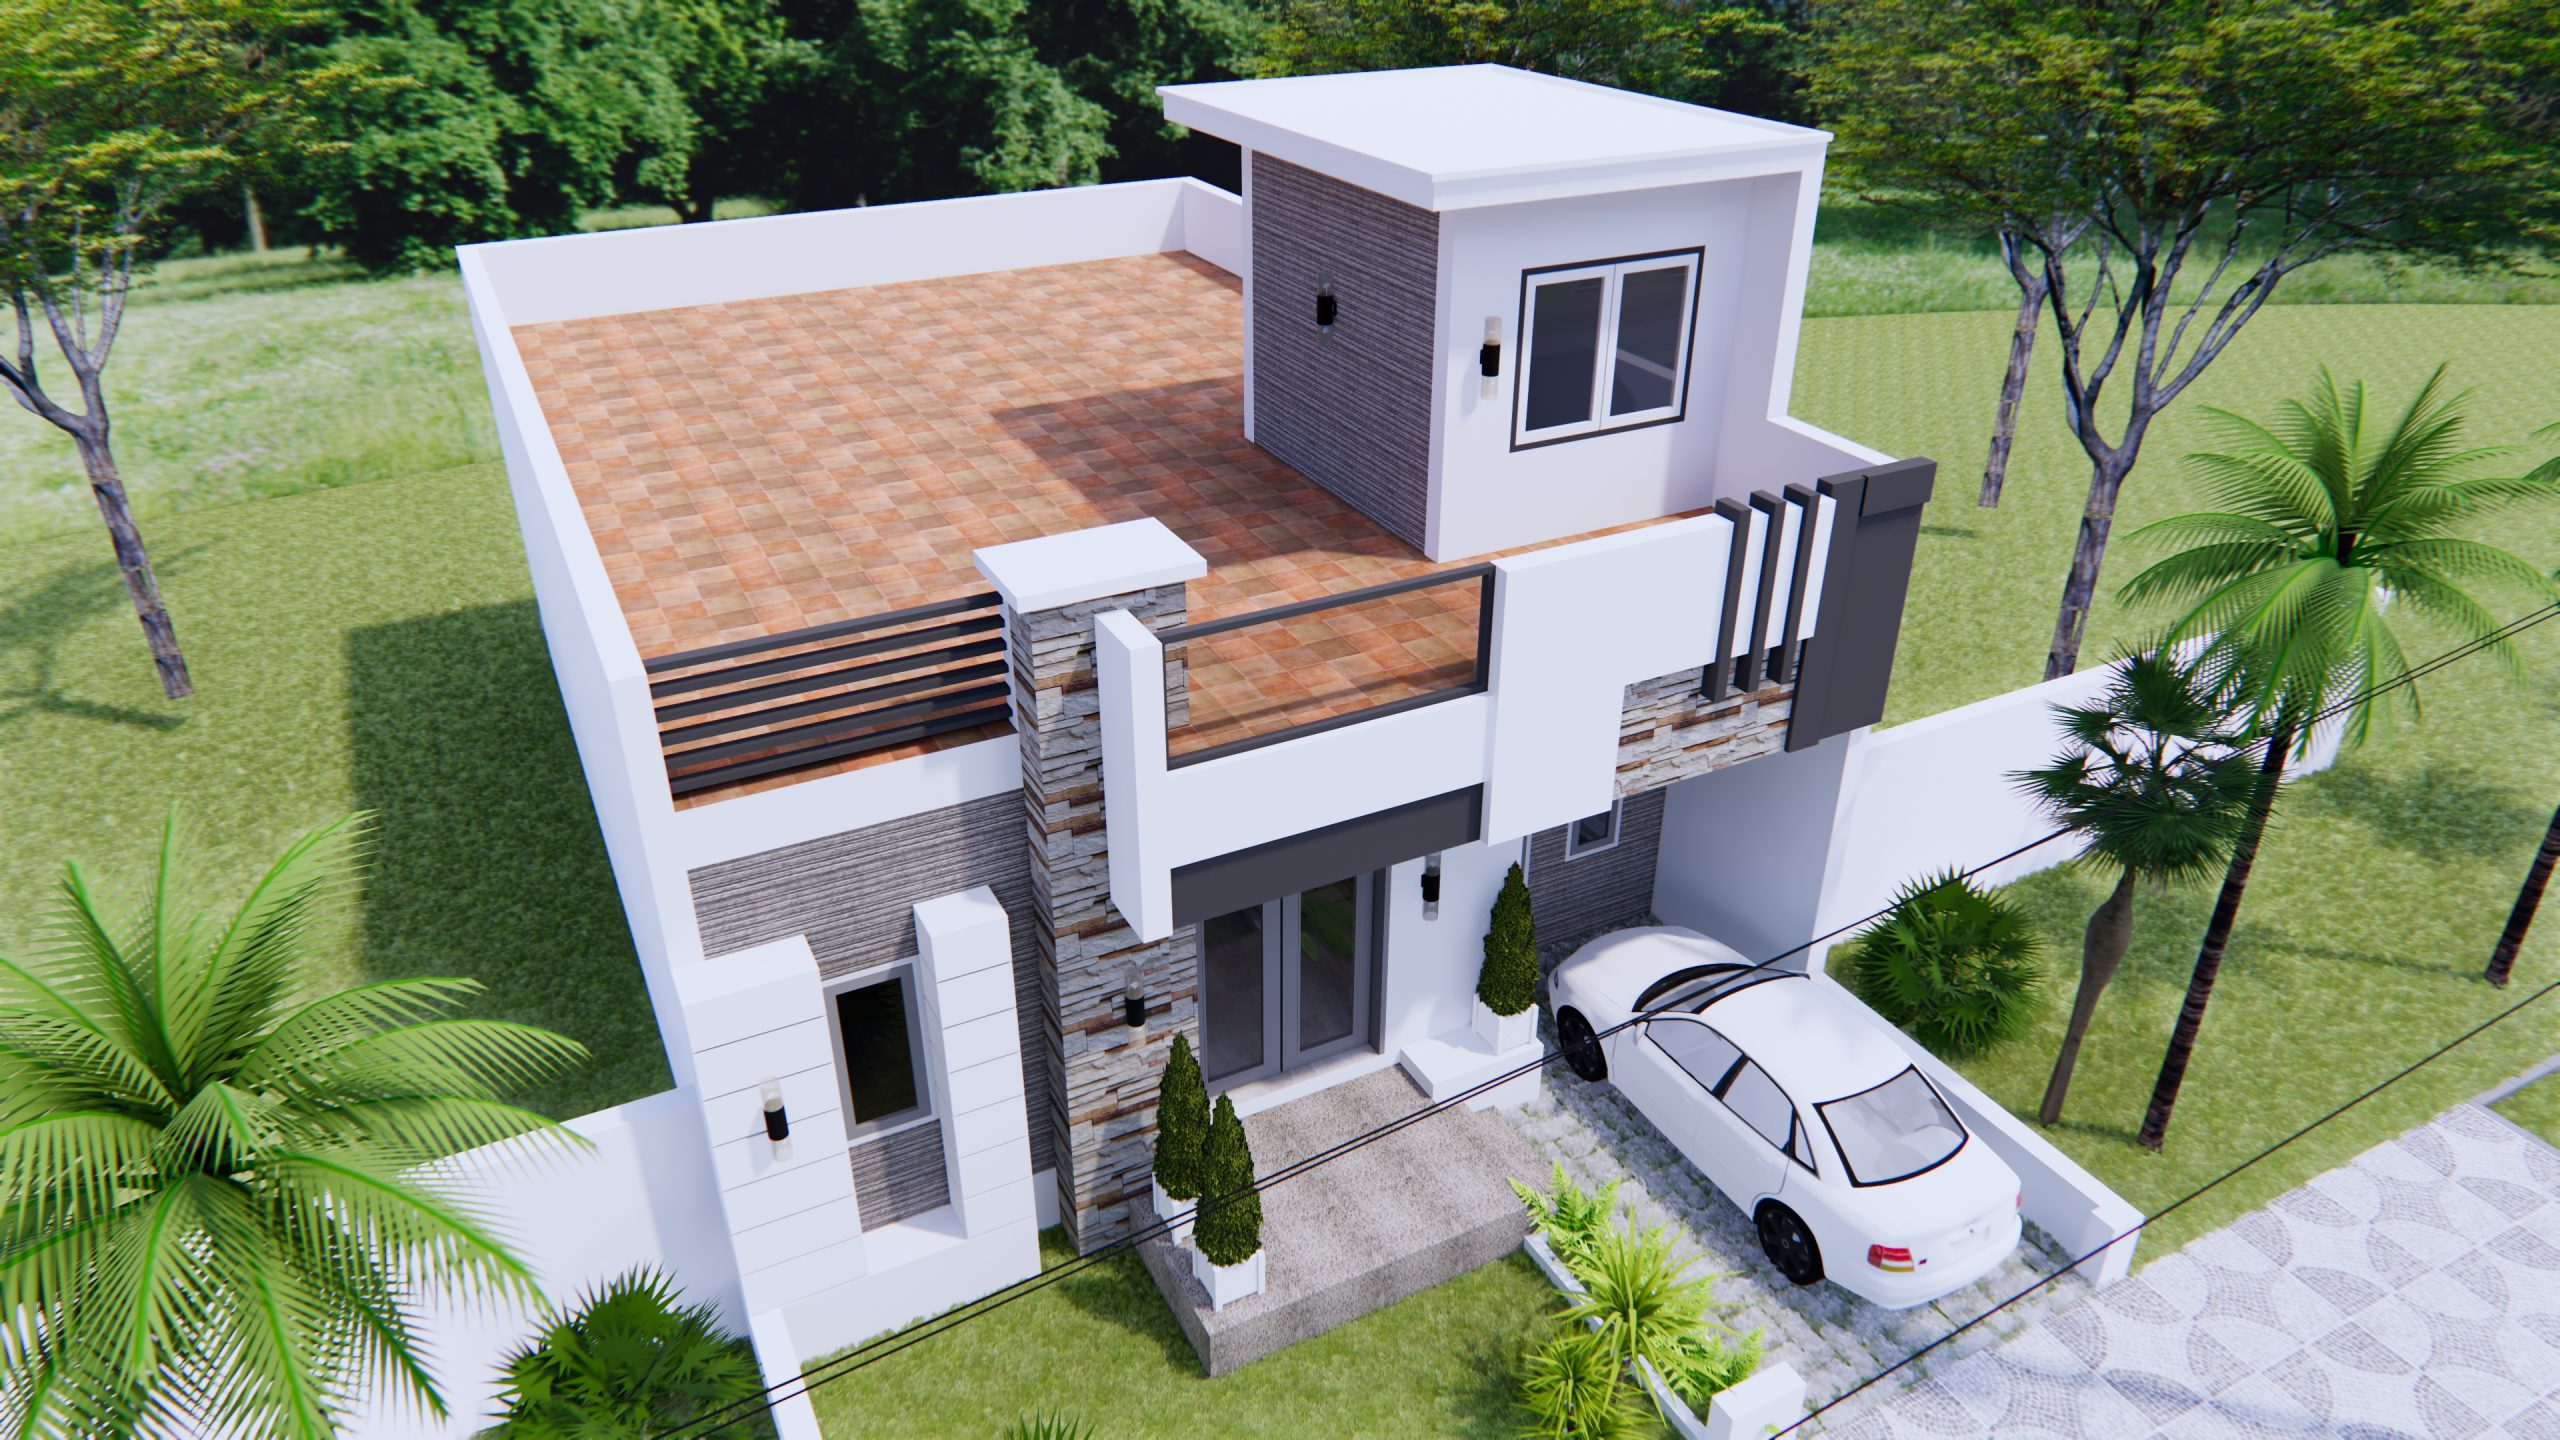 House Design 9x12 with 2 Bedrooms 30x40 Feet